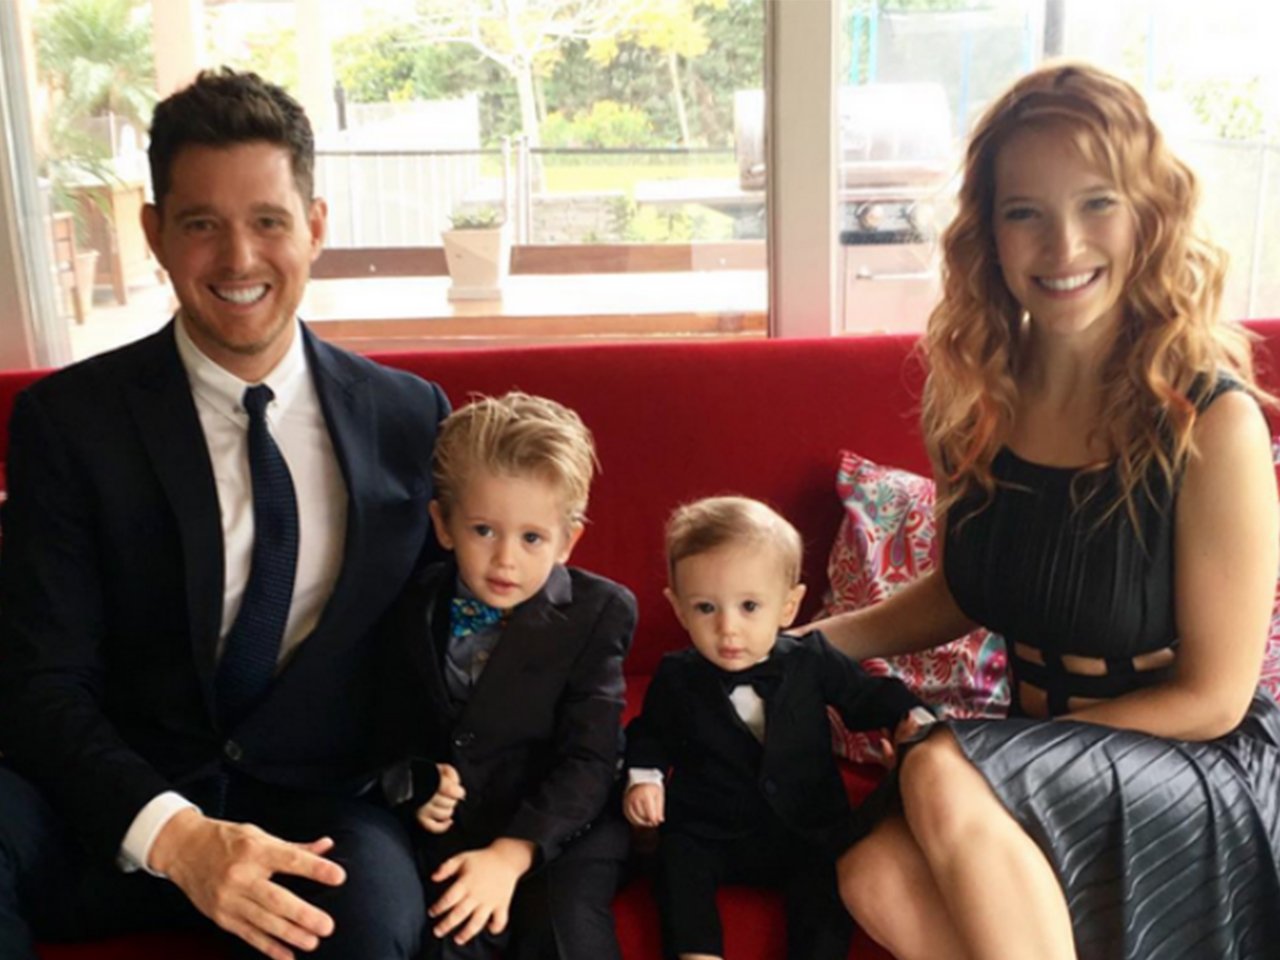 Michael Bublé wife opens up about their son's cancer